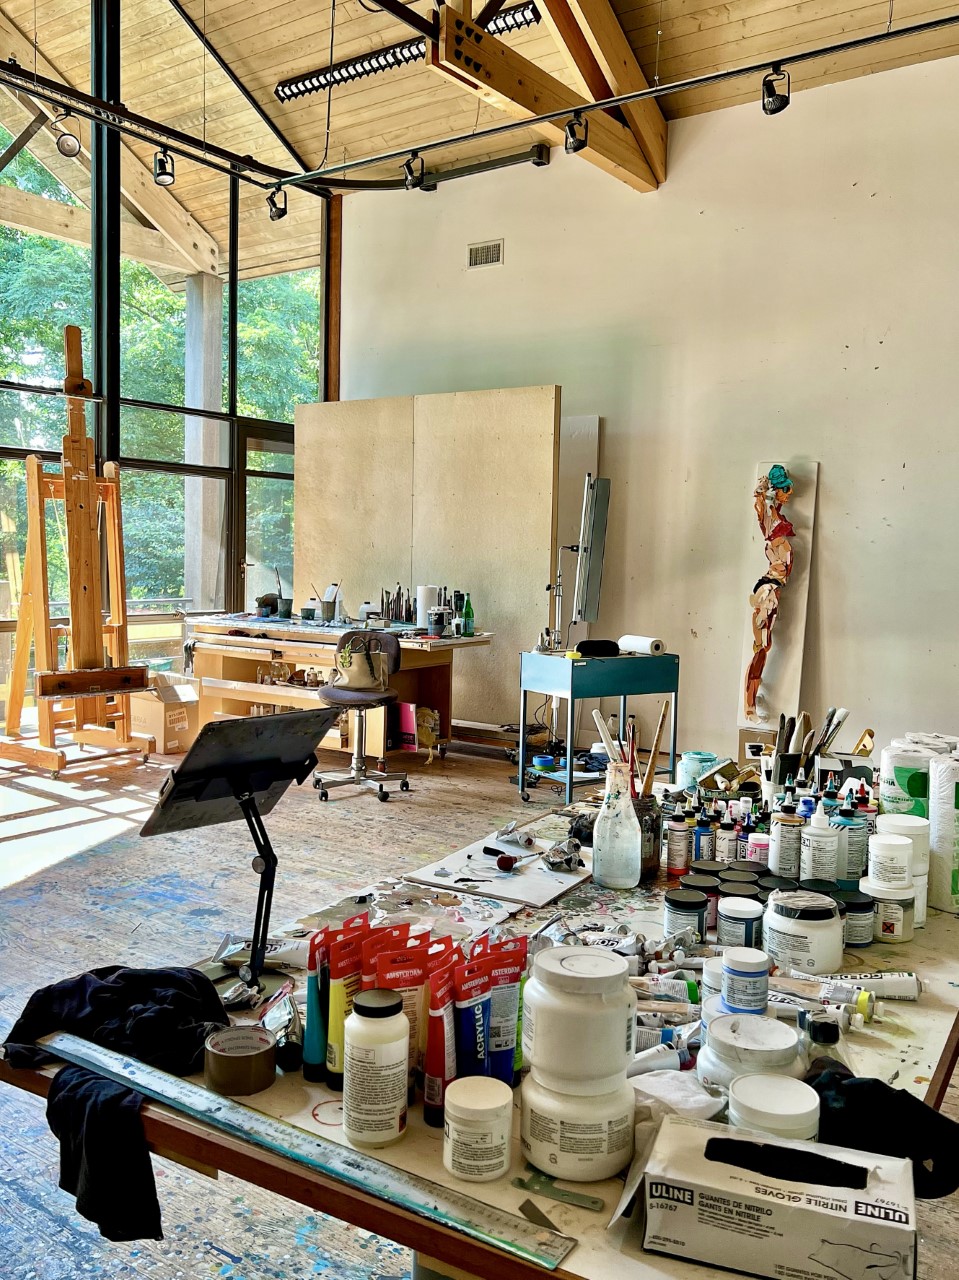 A painting studio with paints and canvases